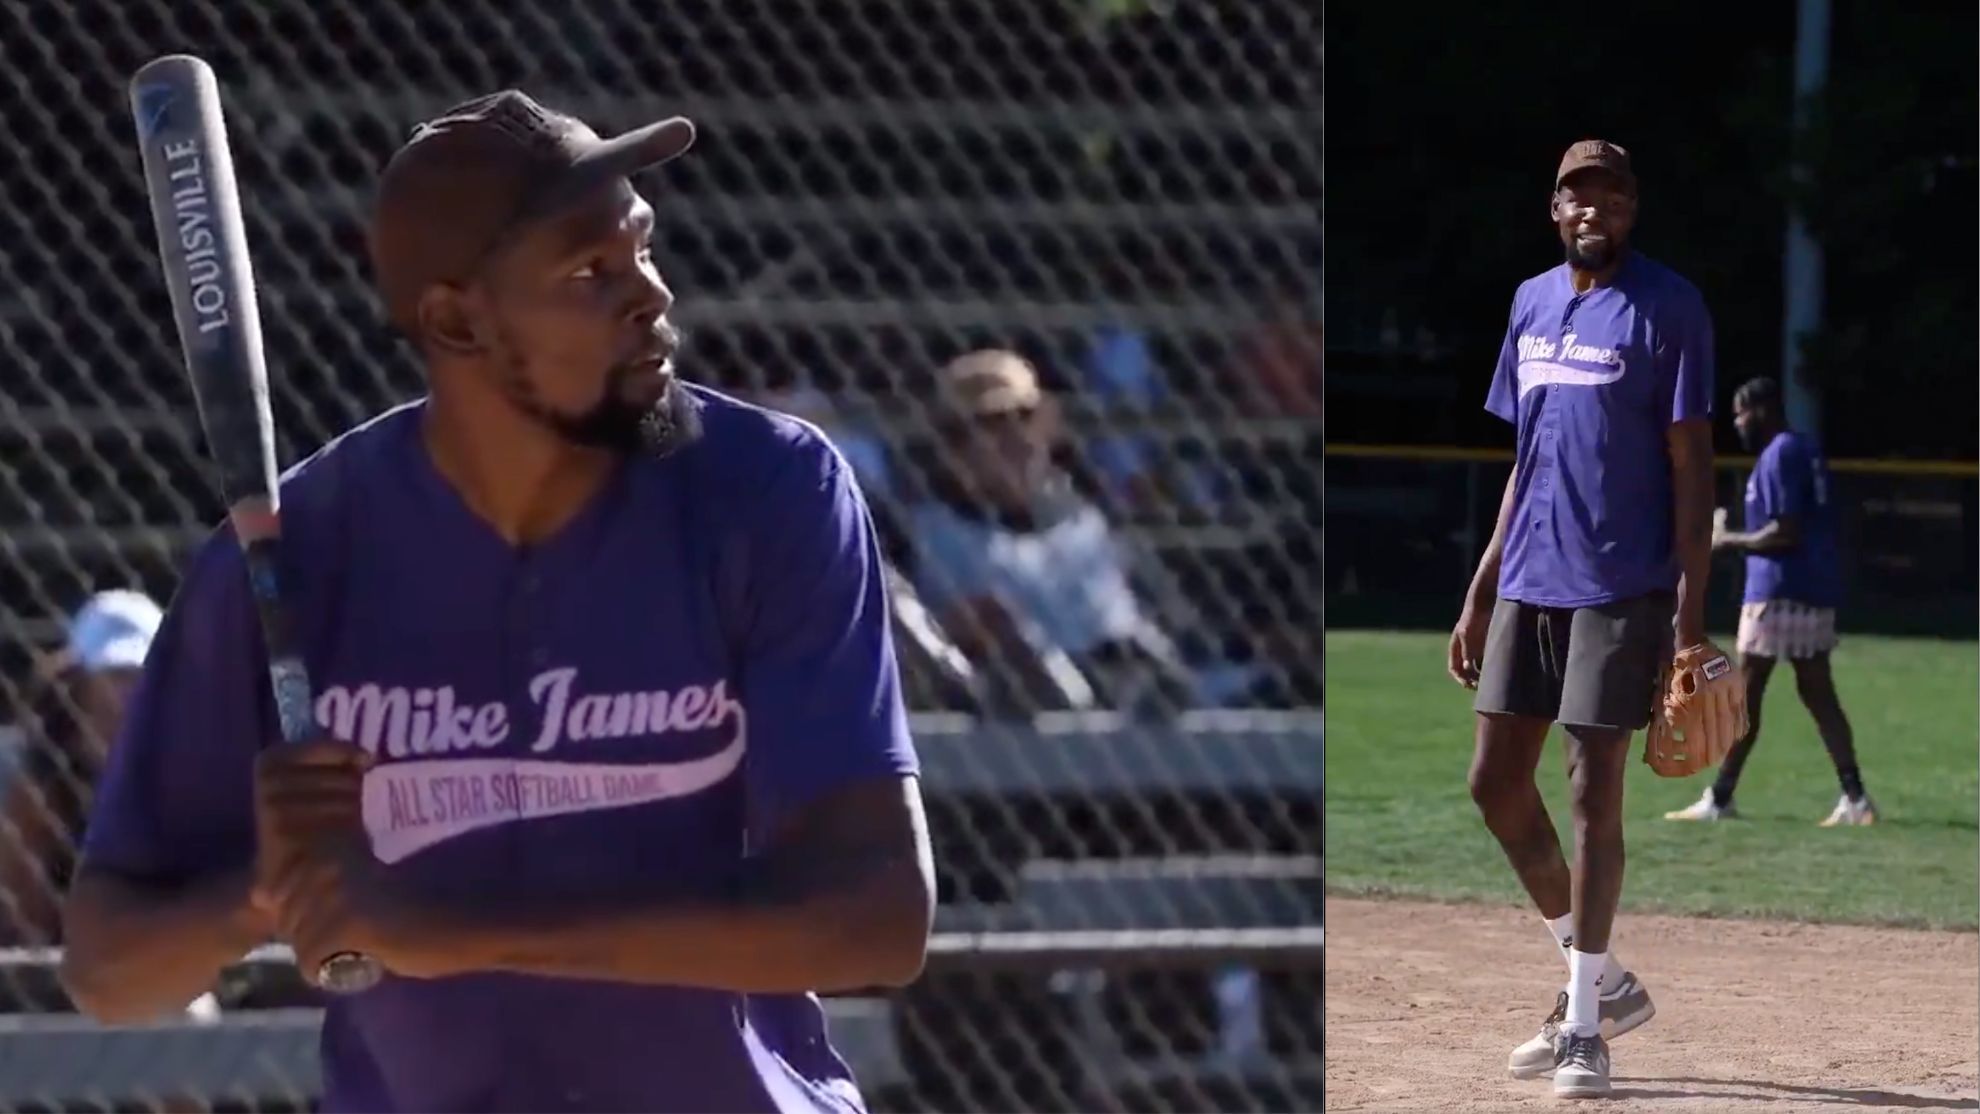 KD was spotted playing in an all-star charity softball game while trade rumors haven't ceased all offseason.